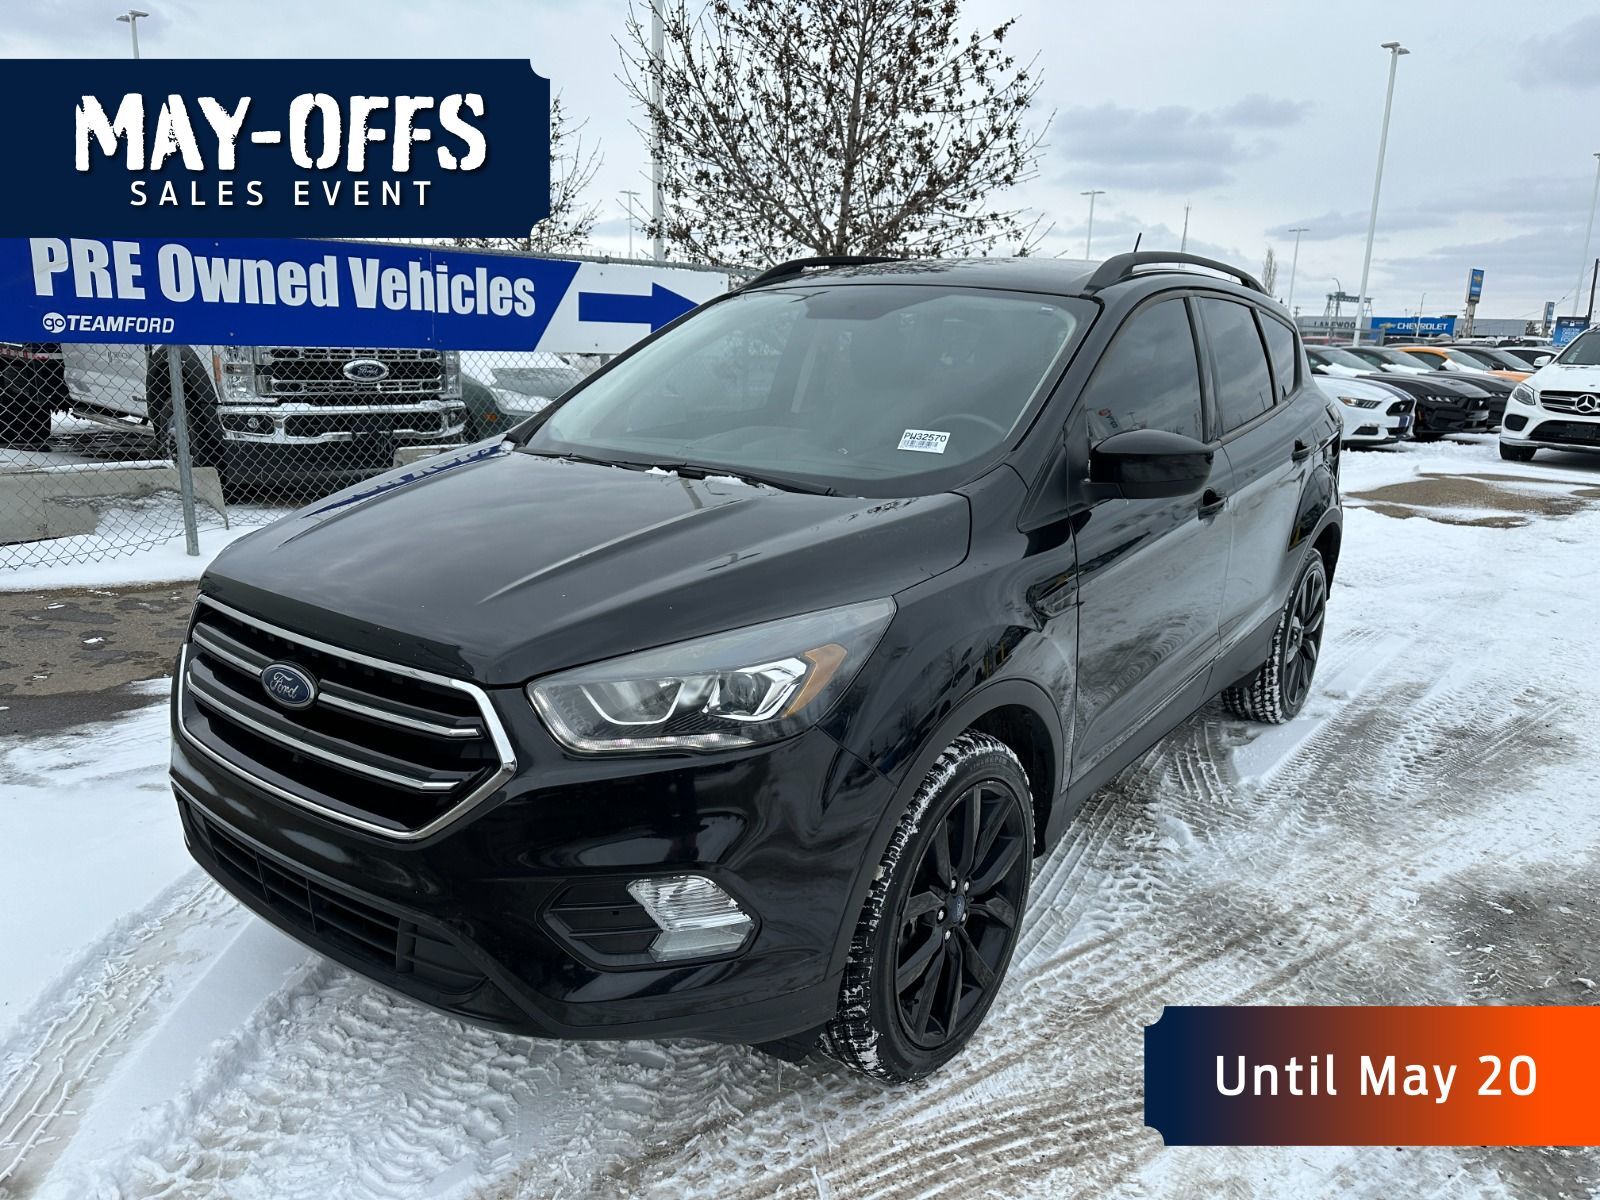 2018 Ford Escape SE - AWD, 1.6L, POWER OPTIONS, CLOTH SEATS AND MUC